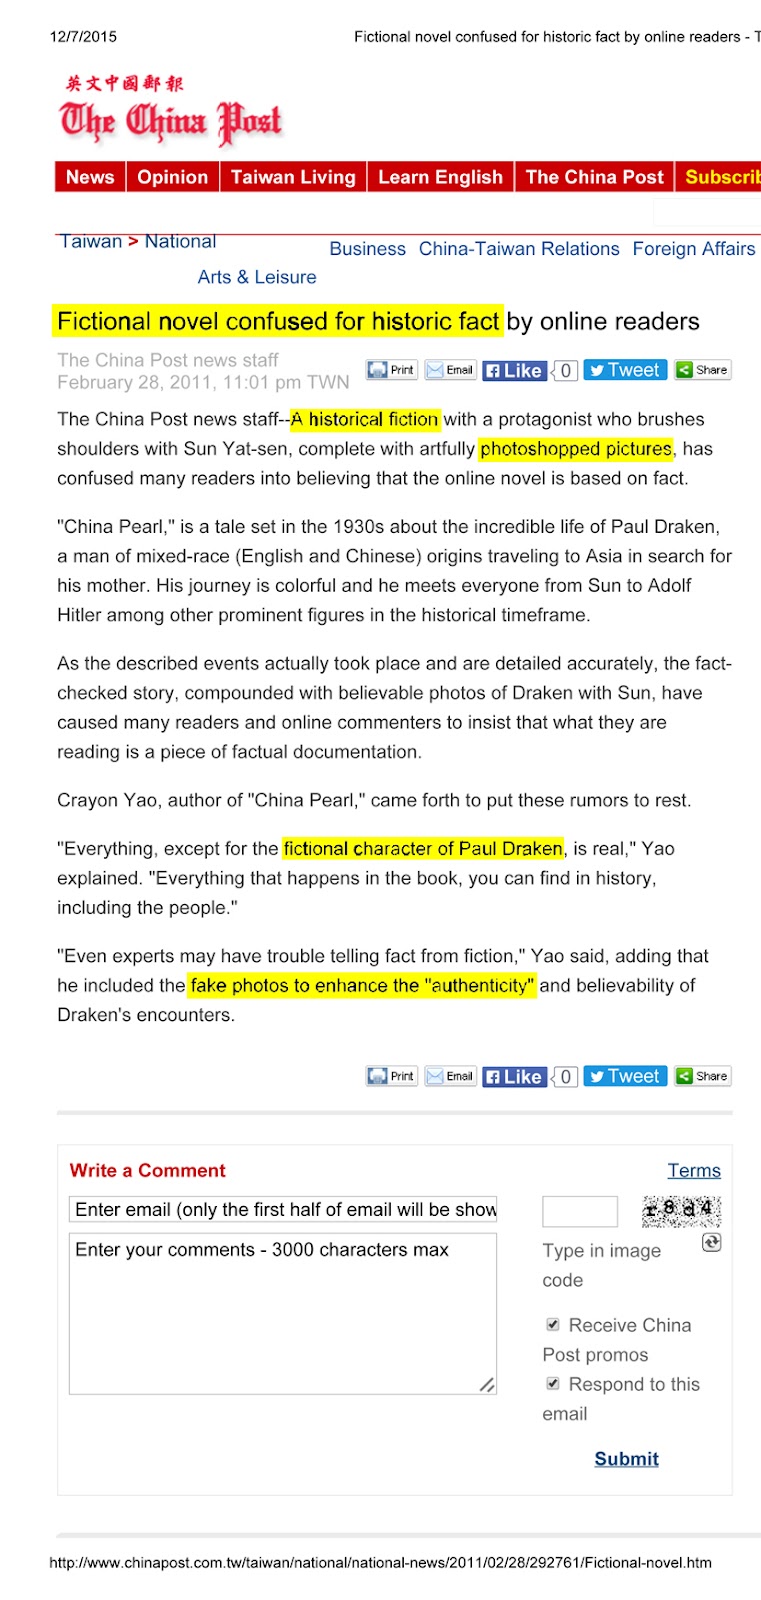 Fictional novel confused for historic fact by online readers - The China Post.jpg